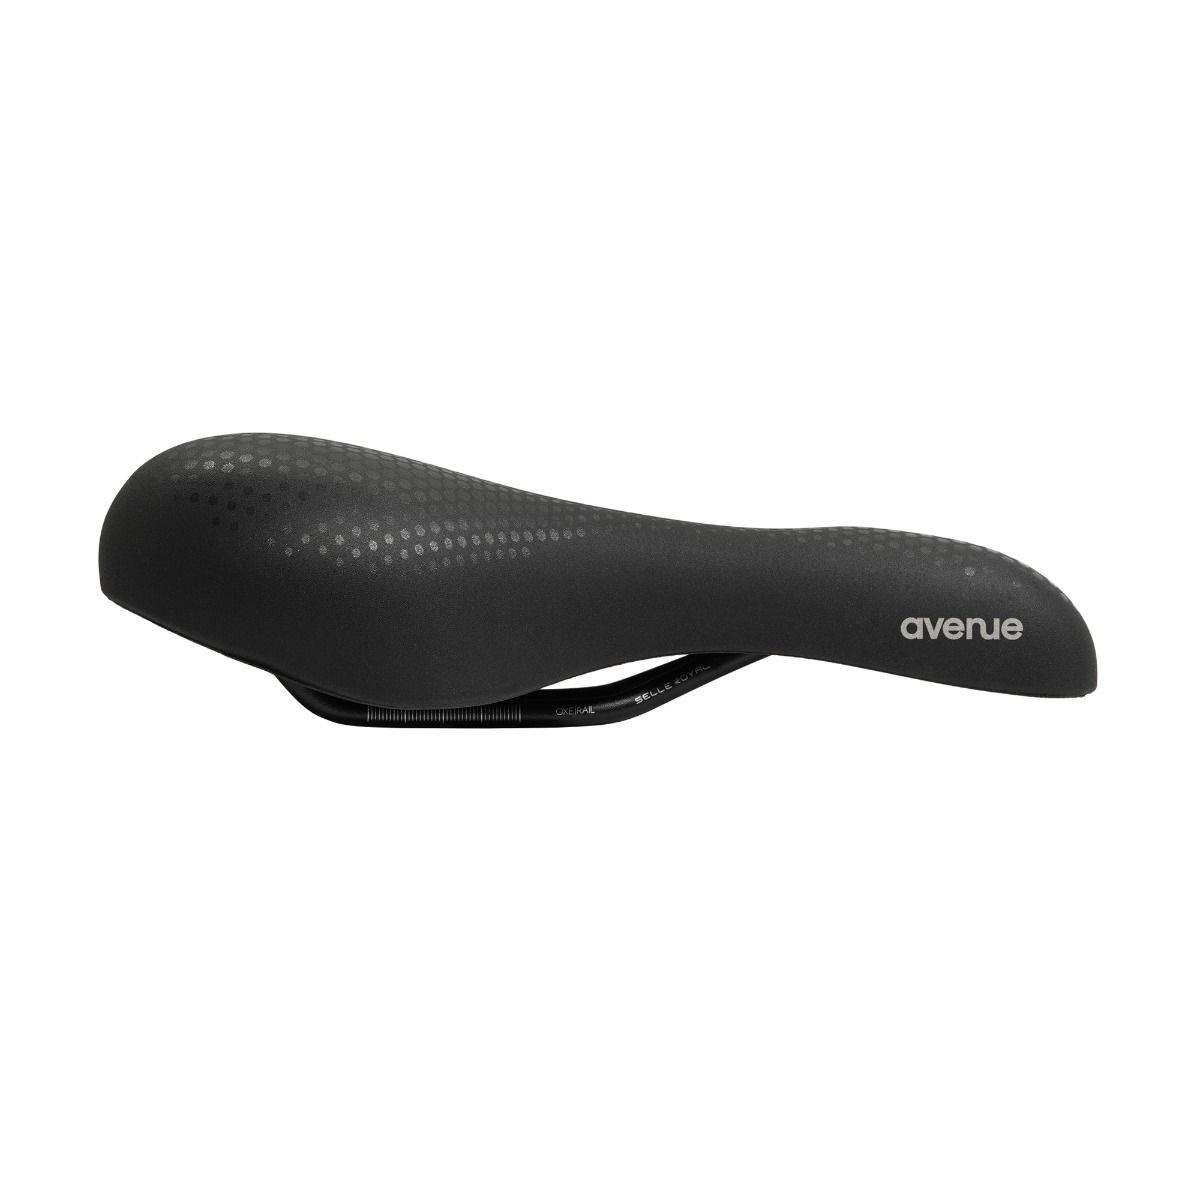 Truckee Black in Saddle - The BackCountry Athletic Avenue BackCountry The Royal | Selle